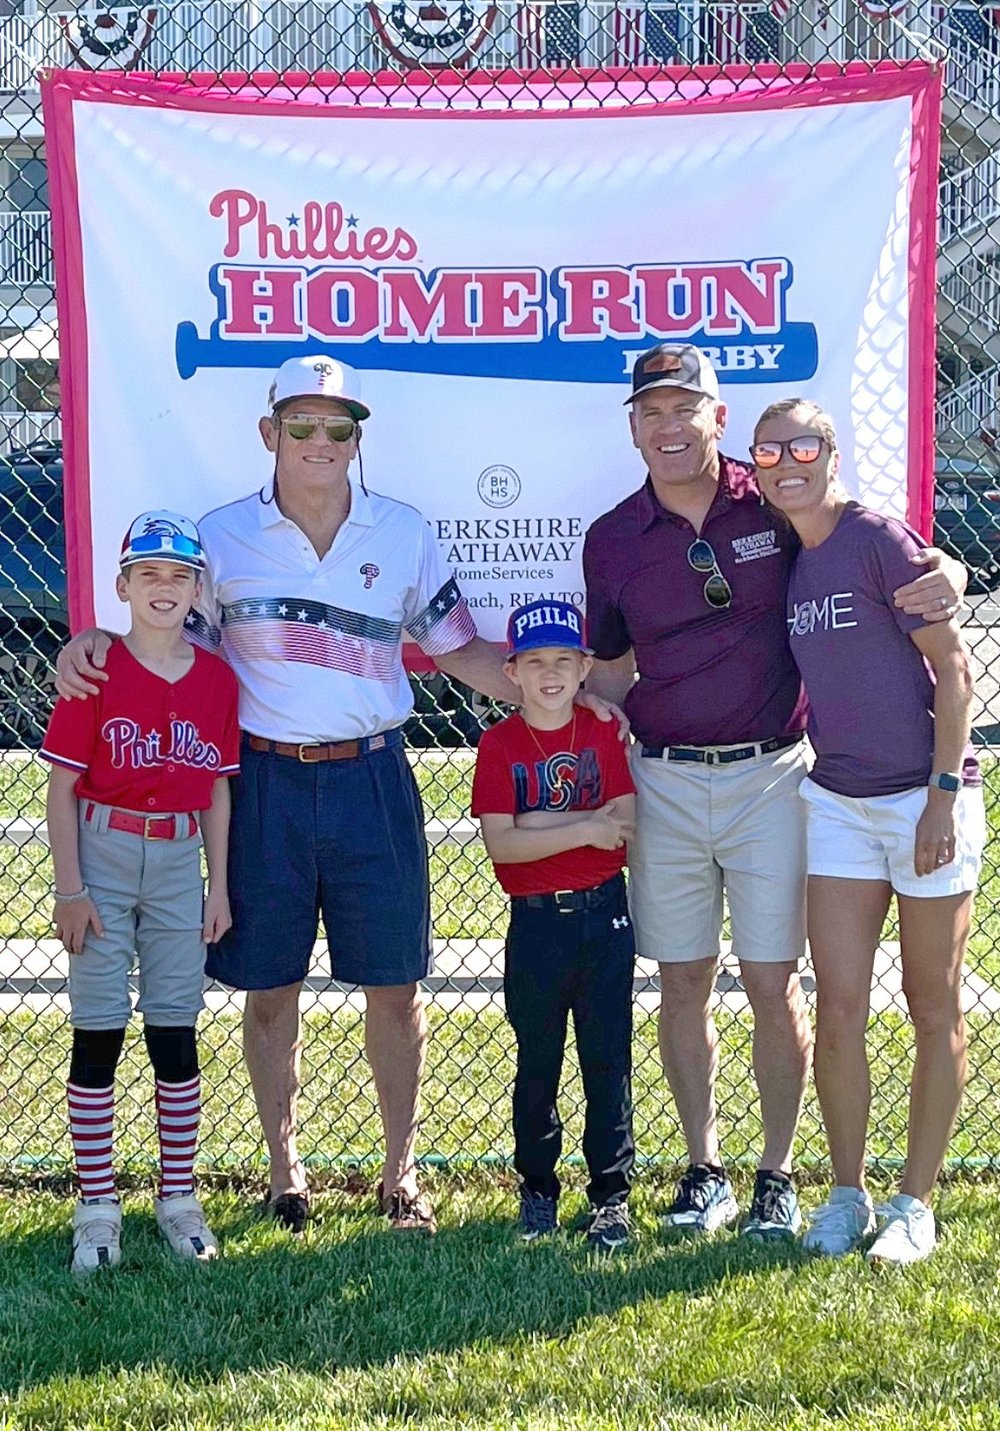 Phillies owner John Middleton visited the Jack Vizzard Group for the Phillies Home Run Derby in Stone Harbor.